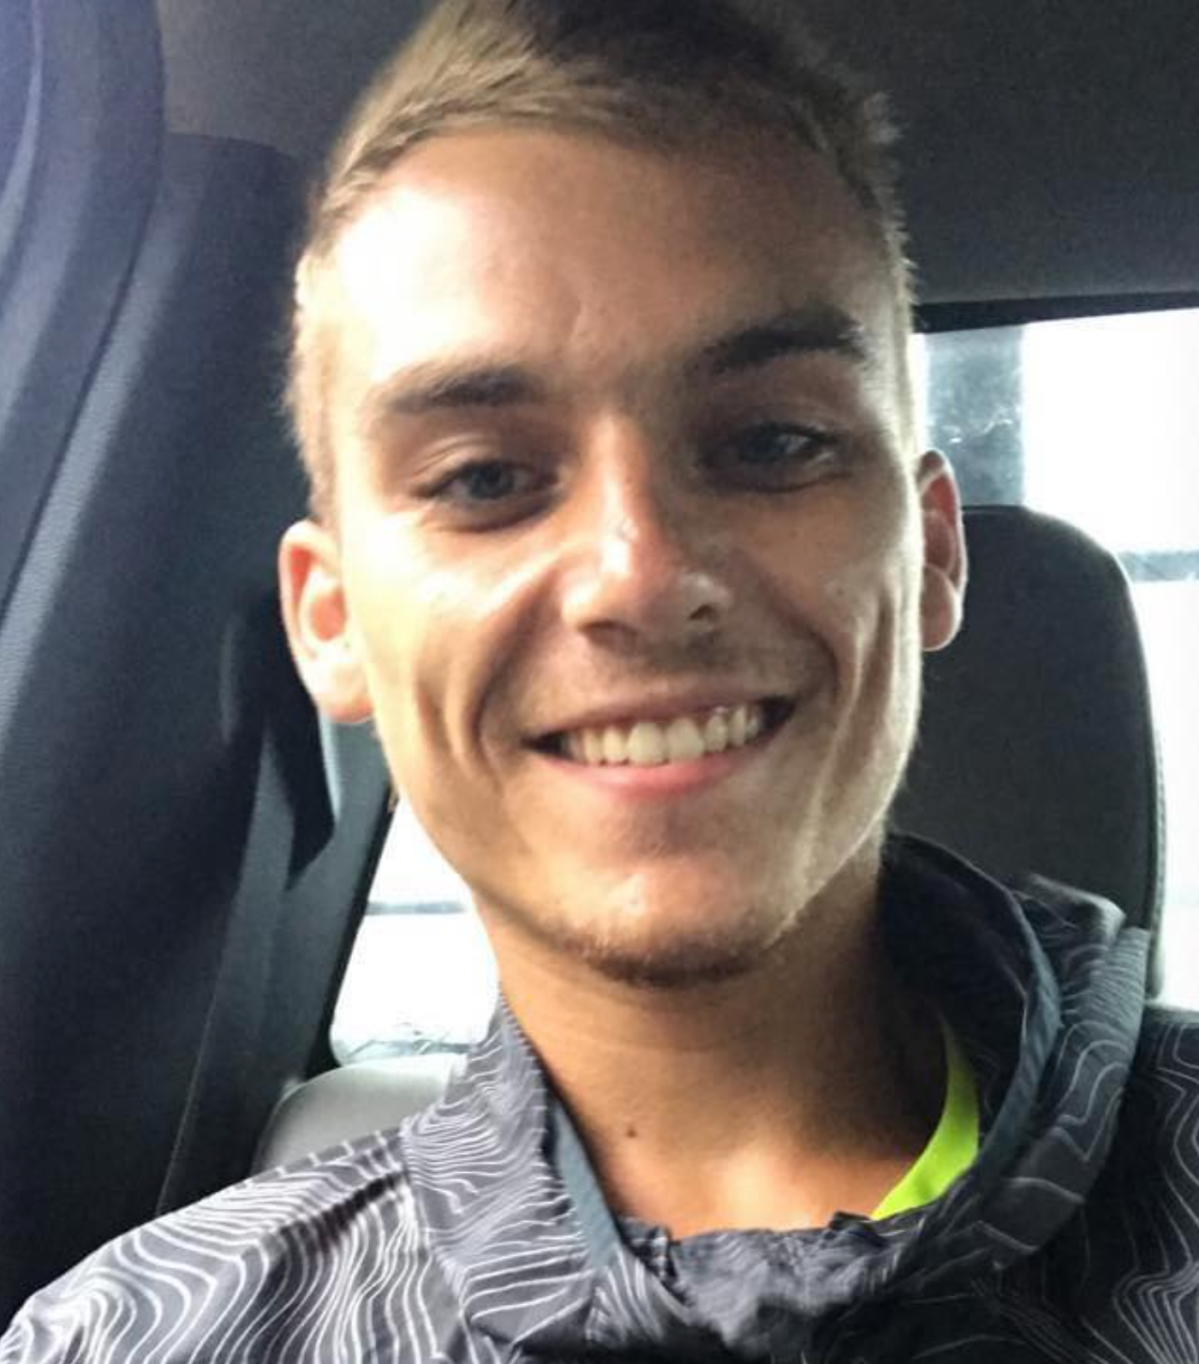 Northumberland OPP say a body found Sept. 18 in Alnwick-Halidmand Township has been identified as missing person Travis Nickerson, 22, of Hastings, Ont.